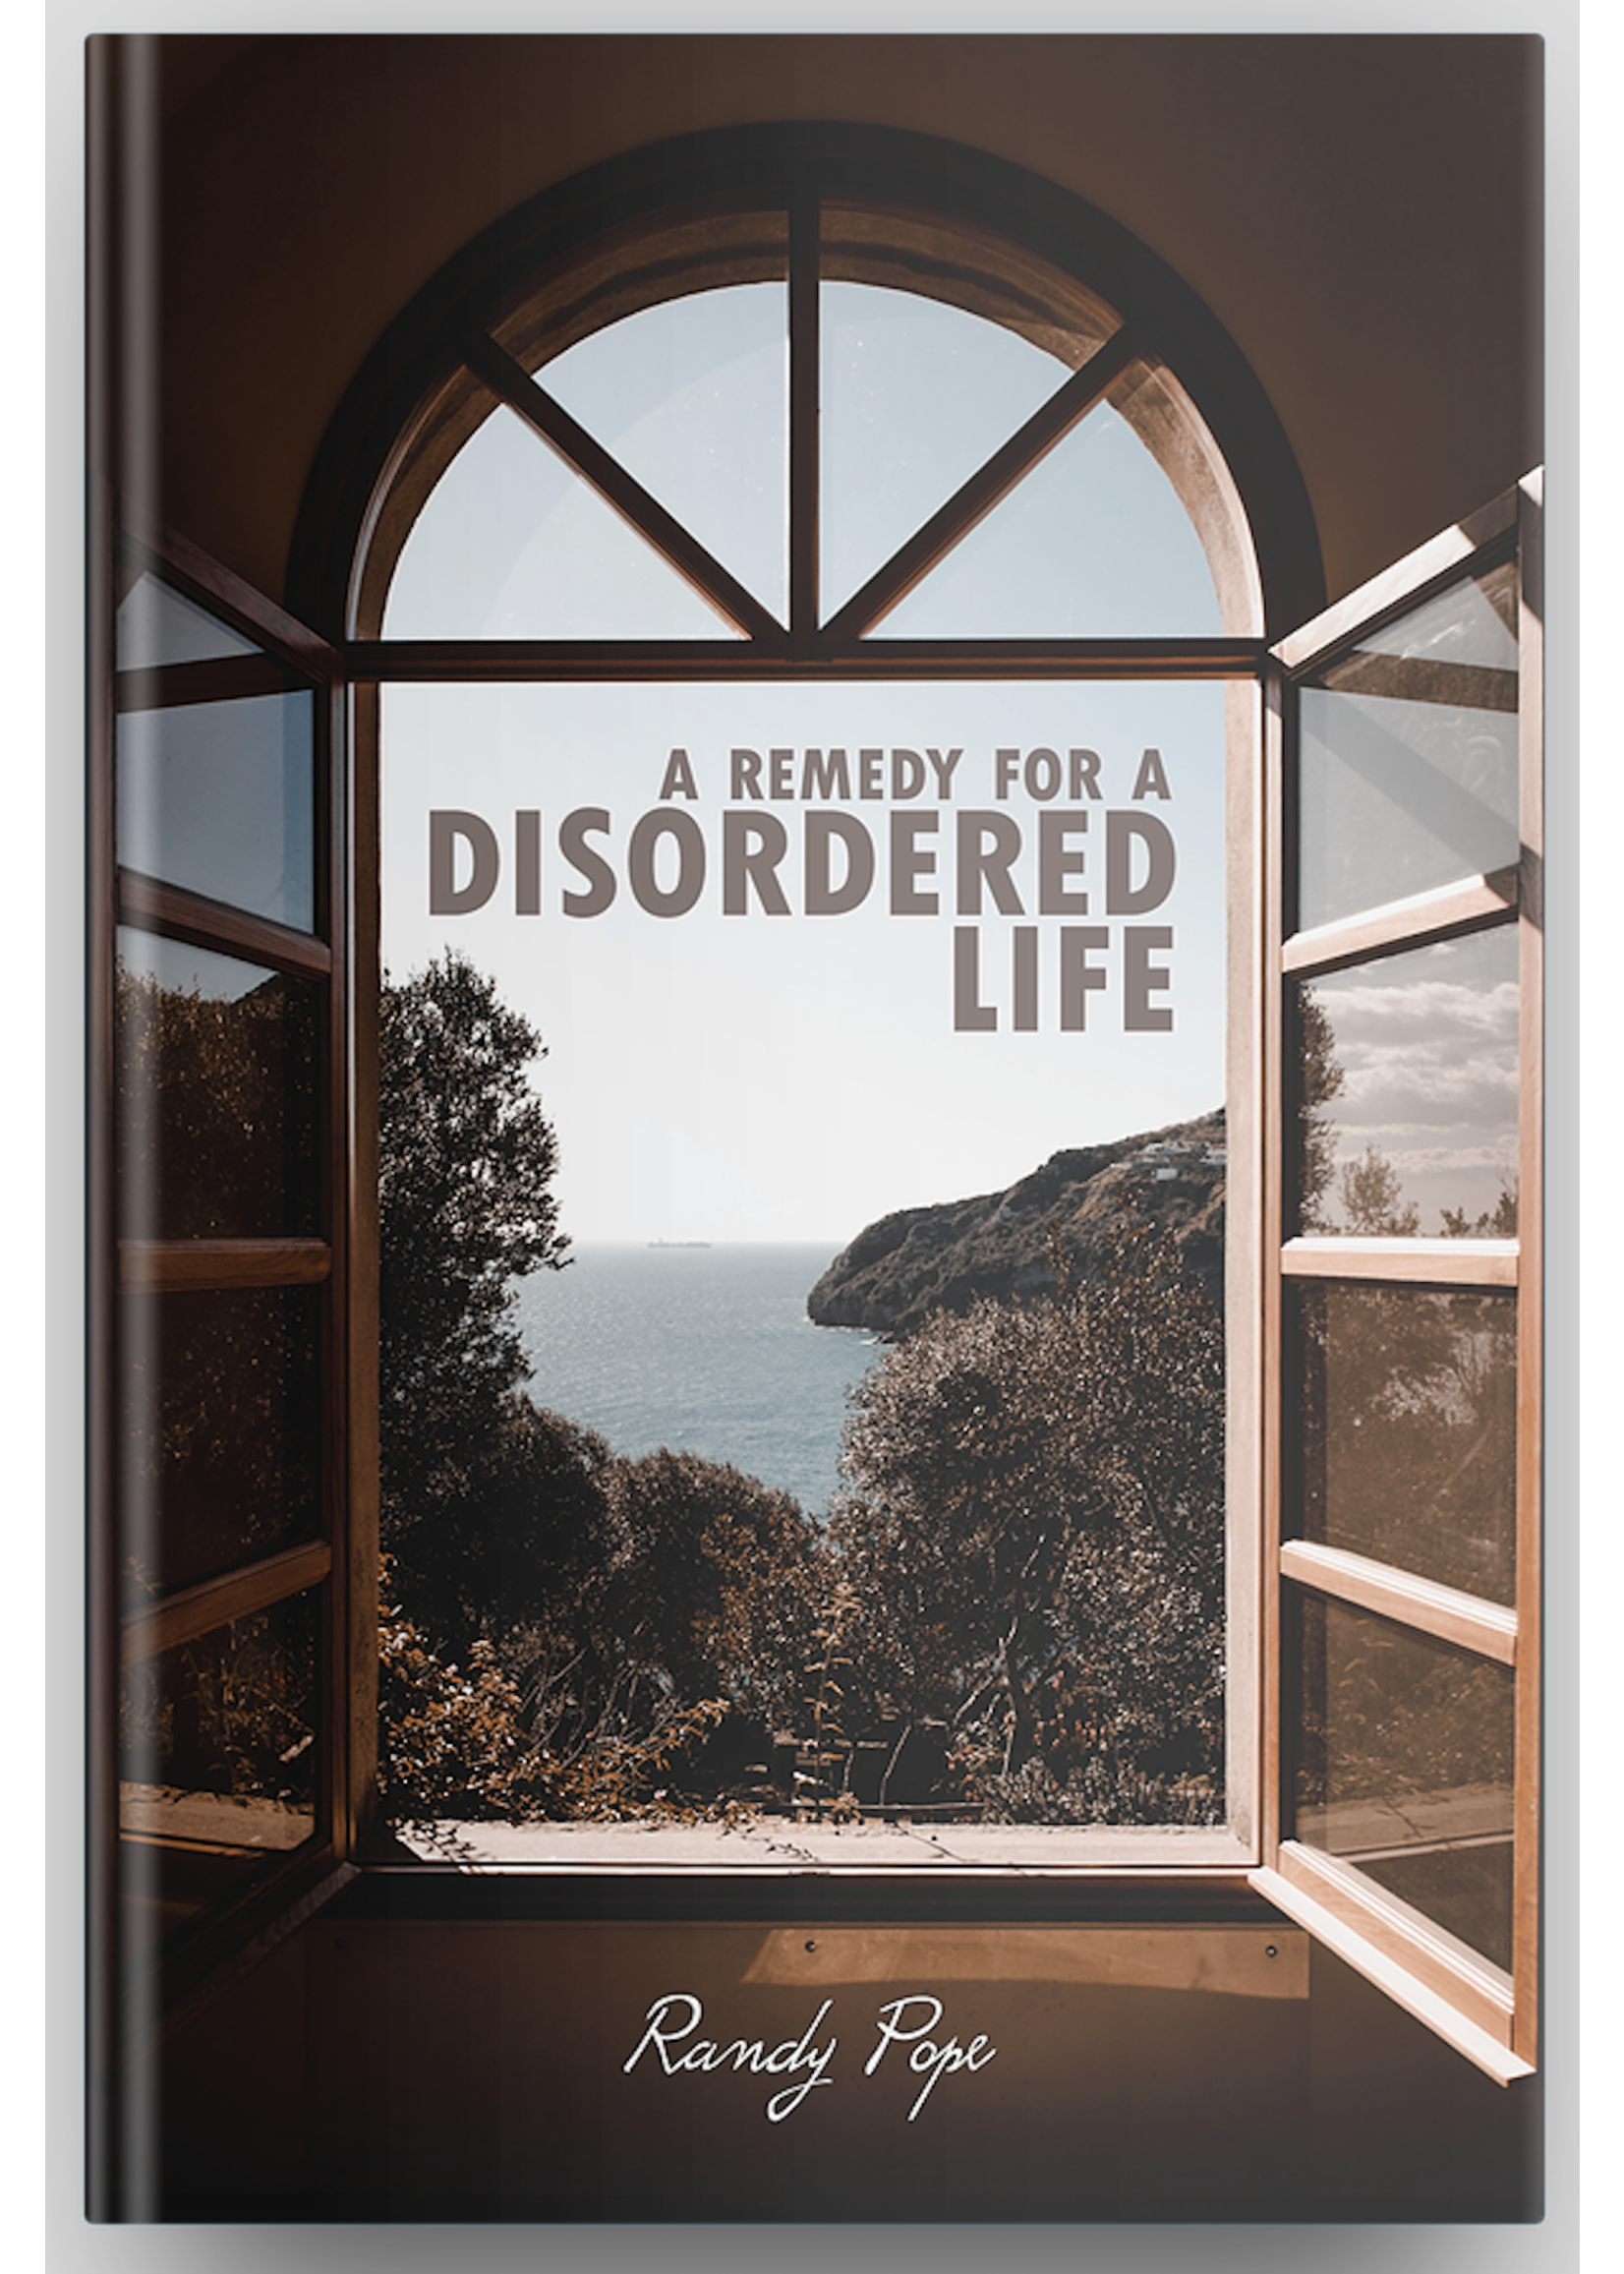 life on life A Remedy for a Disordered Life